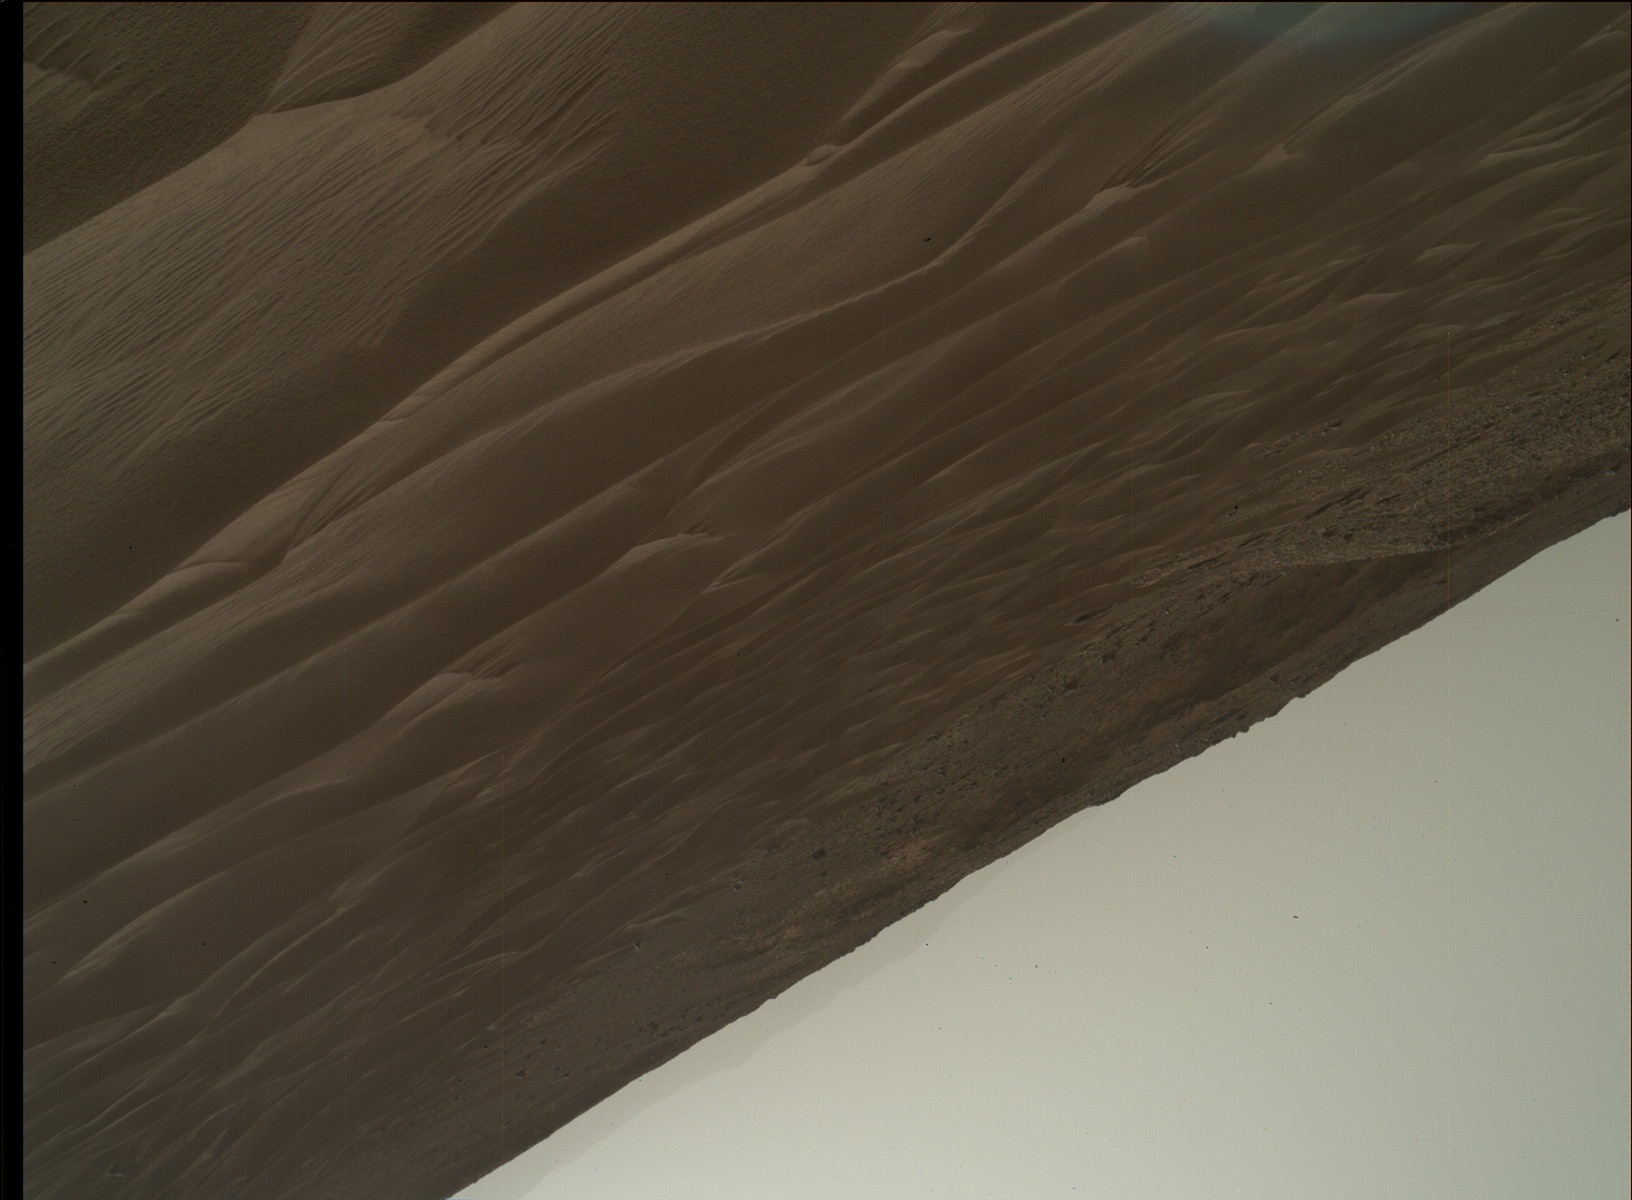 Nasa's Mars rover Curiosity acquired this image using its Mars Hand Lens Imager (MAHLI) on Sol 709